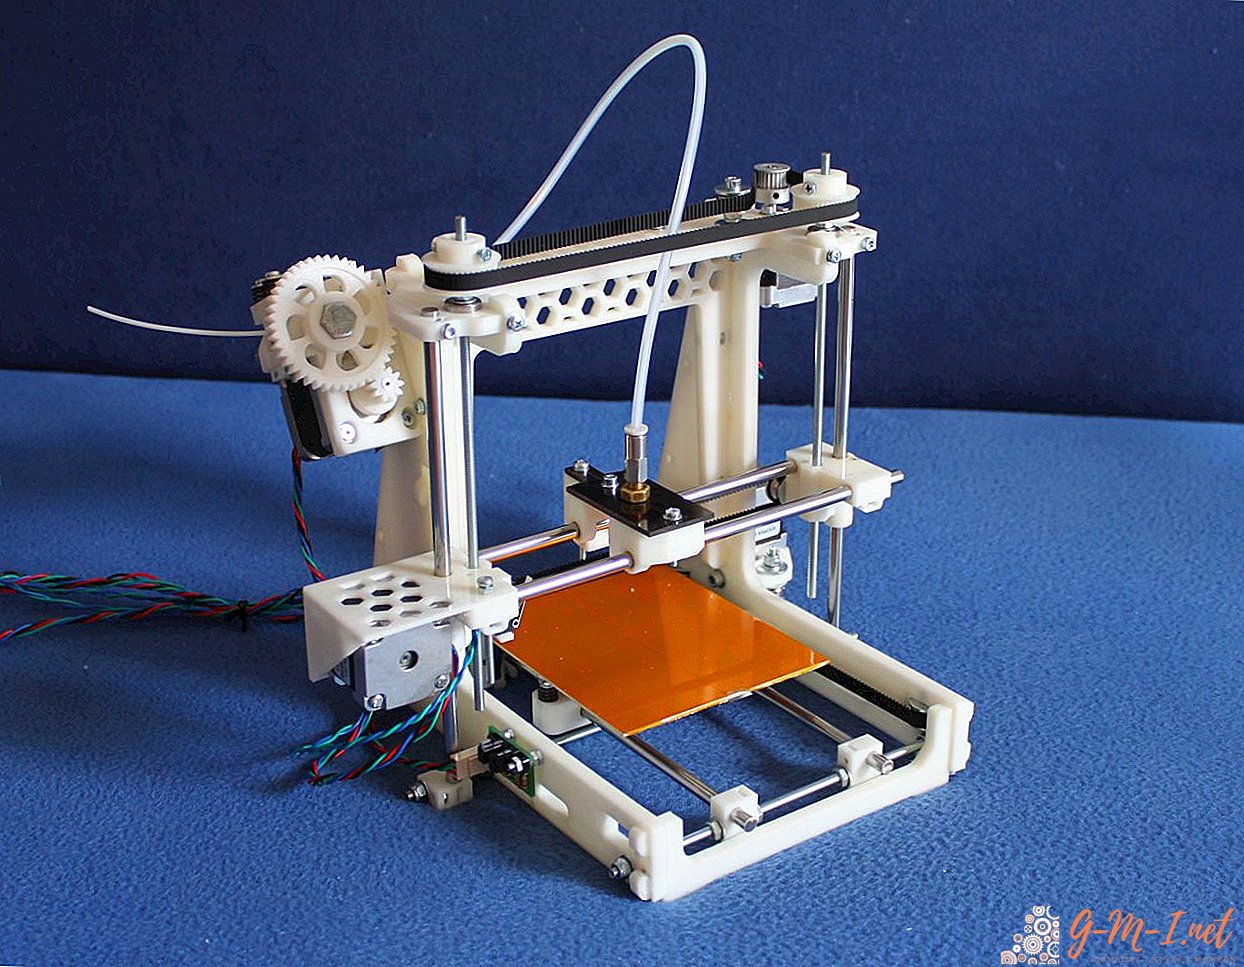 How to make a 3D printer with your own hands